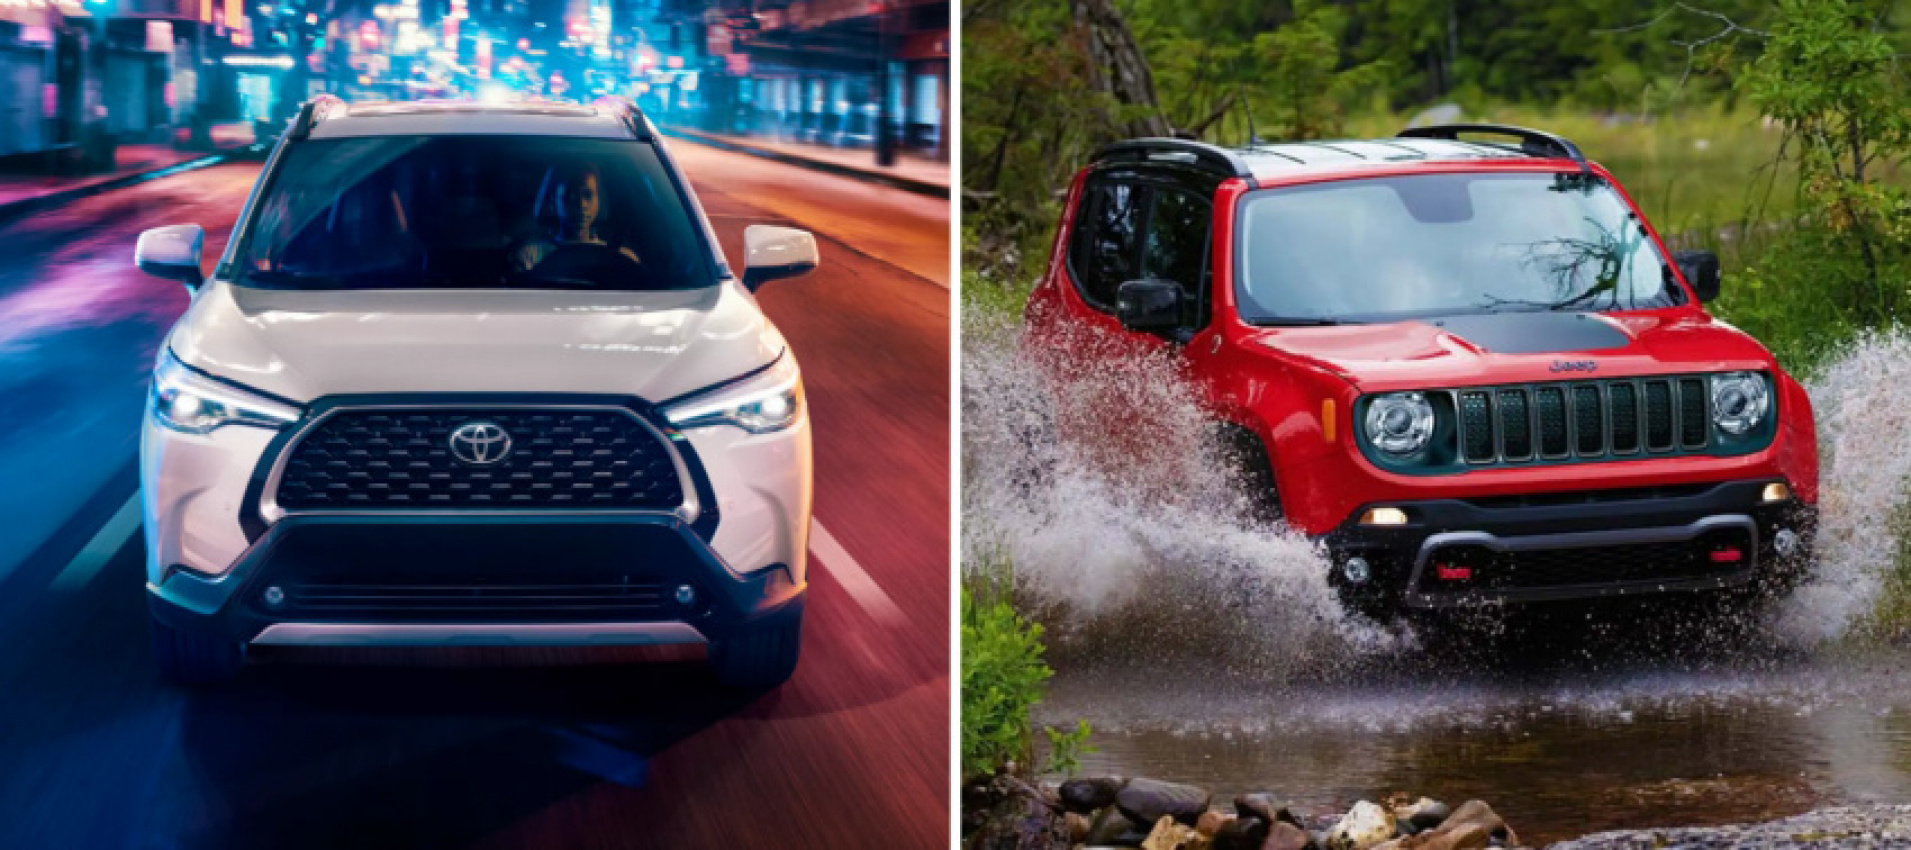 android, autos, cars, jeep, toyota, comparison, corolla cross, jeep renegade, renegade, toyota corolla cross, android, 2022 toyota corolla cross embarrasses the 2022 jeep renegade in a head-to-head showdown